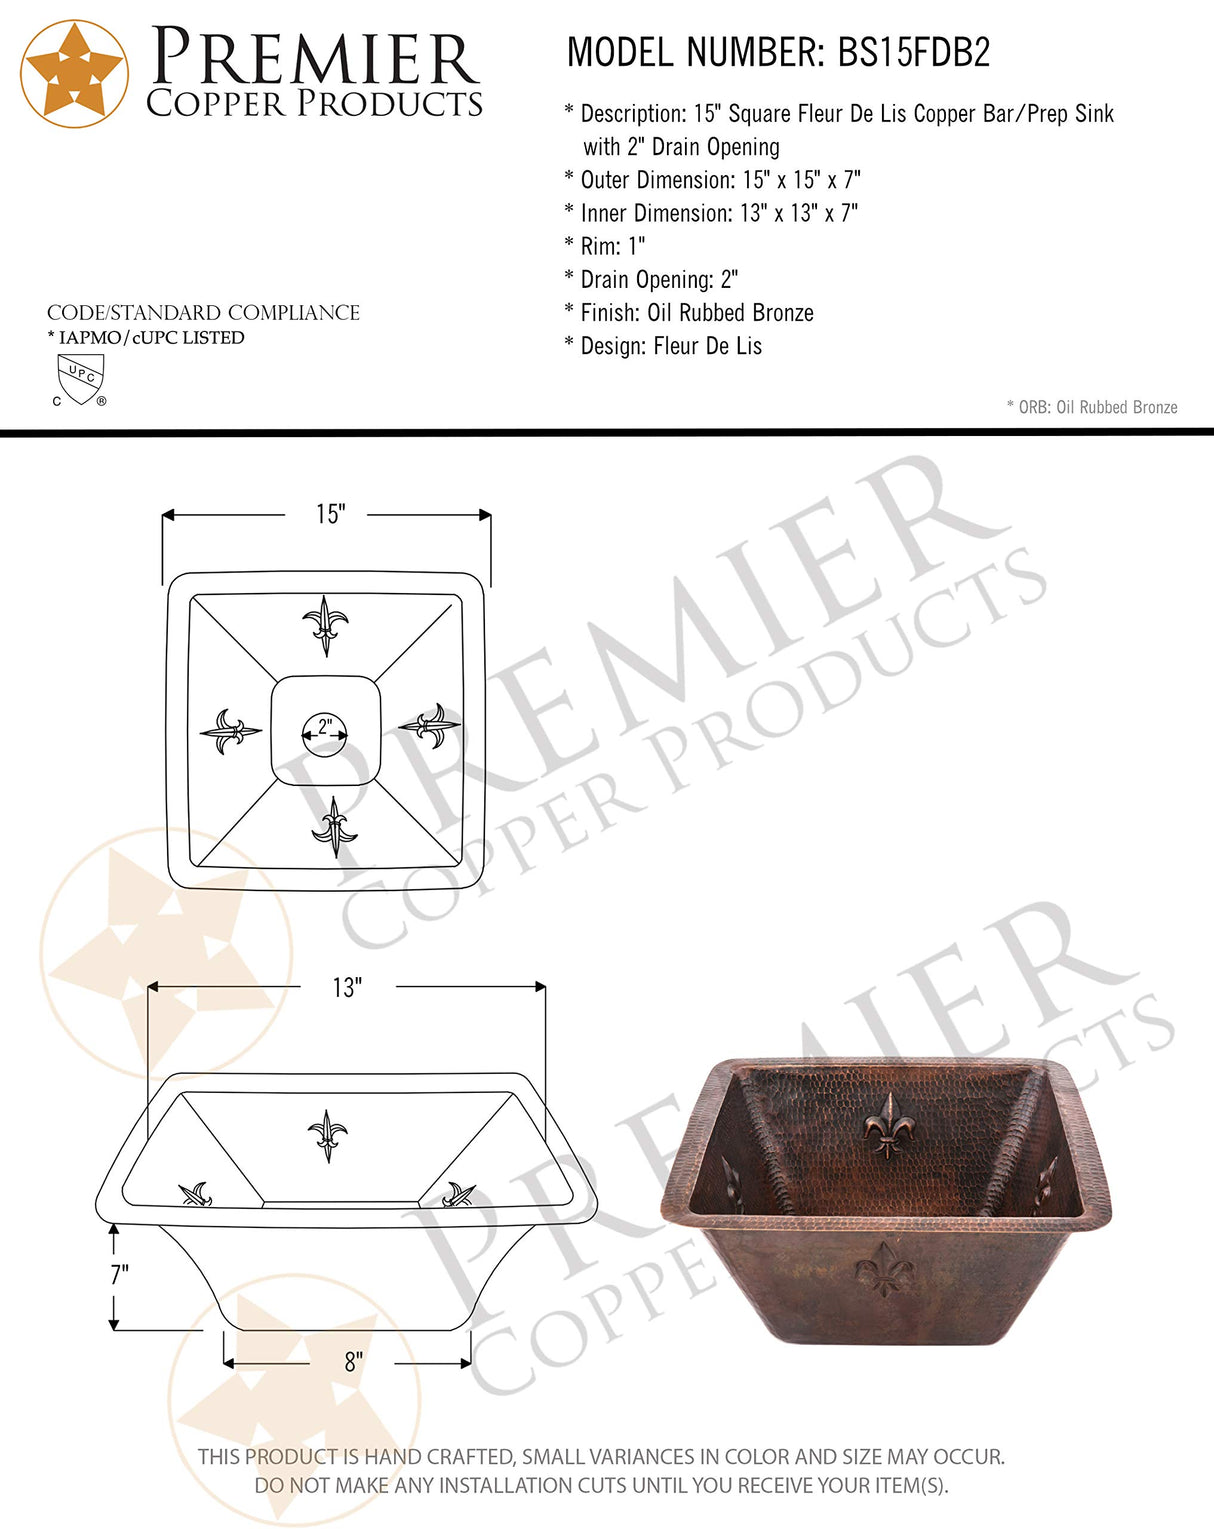 Premier Copper Products BS15FDB2 15-Inch Universal Square Fleur De Lis Hammered Copper Bar Sink with 2-Inch Drain Size, Oil Rubbed Bronze